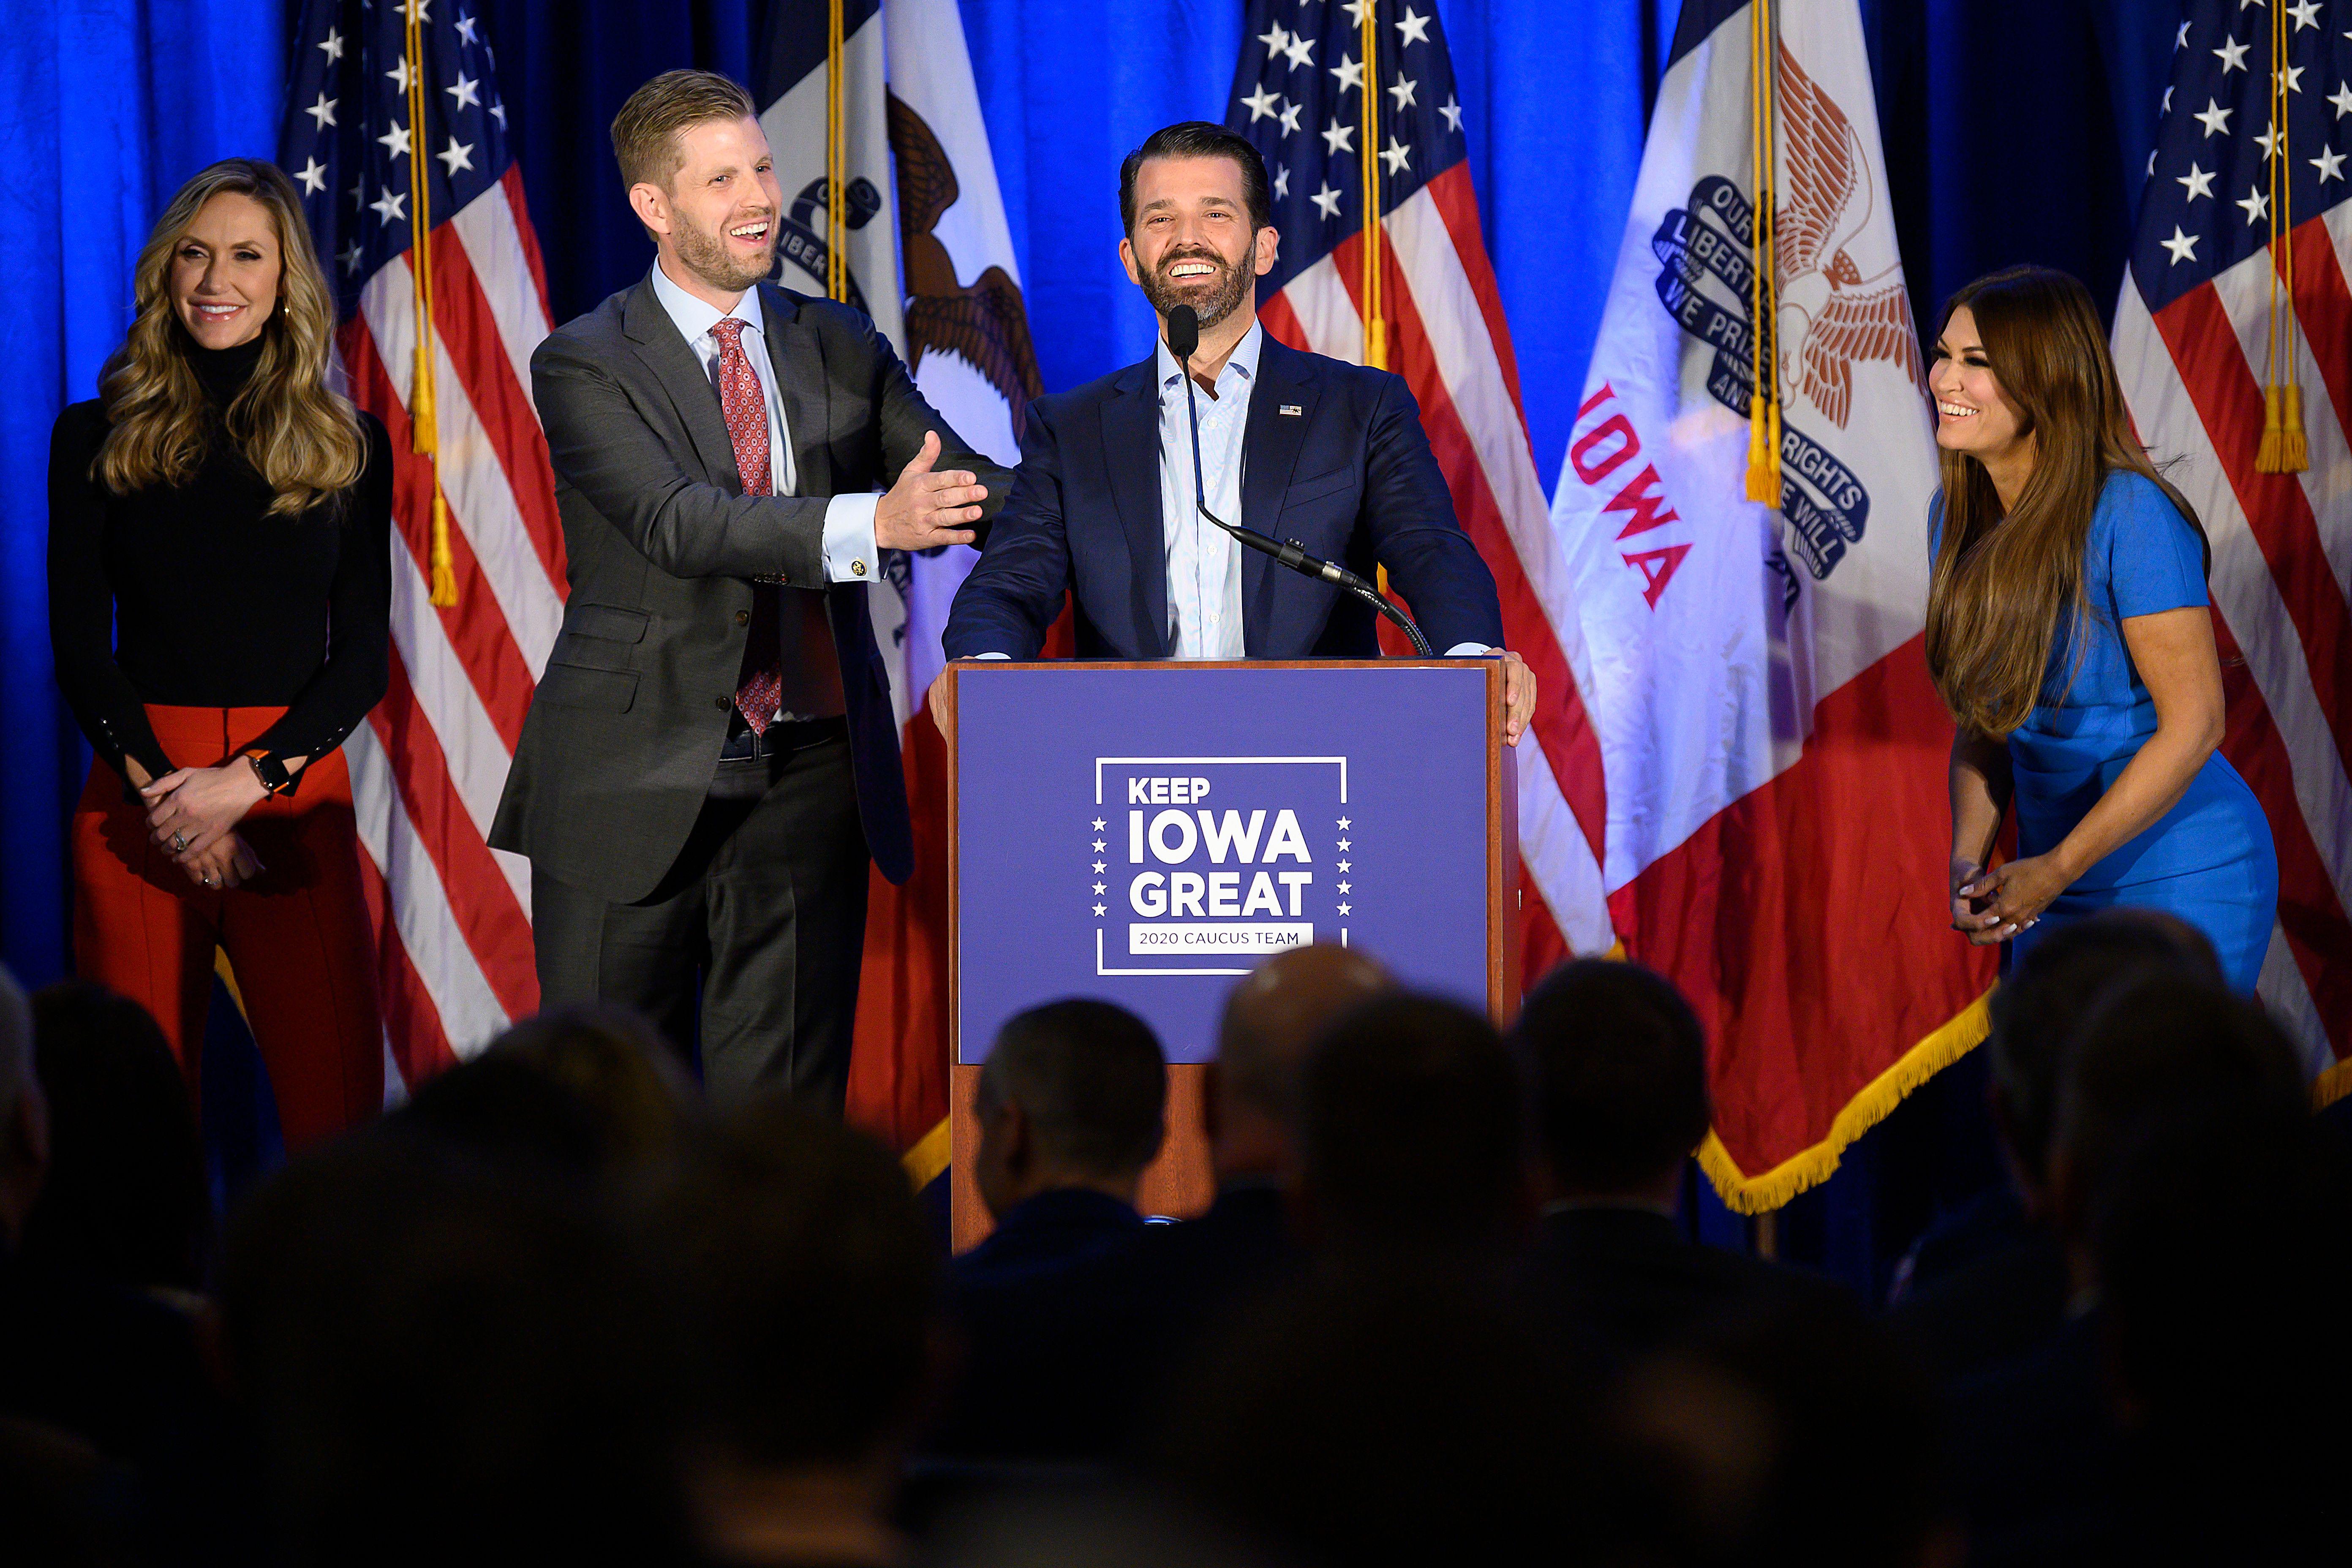 Donald Trump Jr. (C) speaks with his brother Eric (2nd L) and wife Lara, as well as his girlfriend Kimberly Guilfoyle (R) during a "Keep Iowa Great" press conference in Des Moines, IA, on February 3, 2020. 